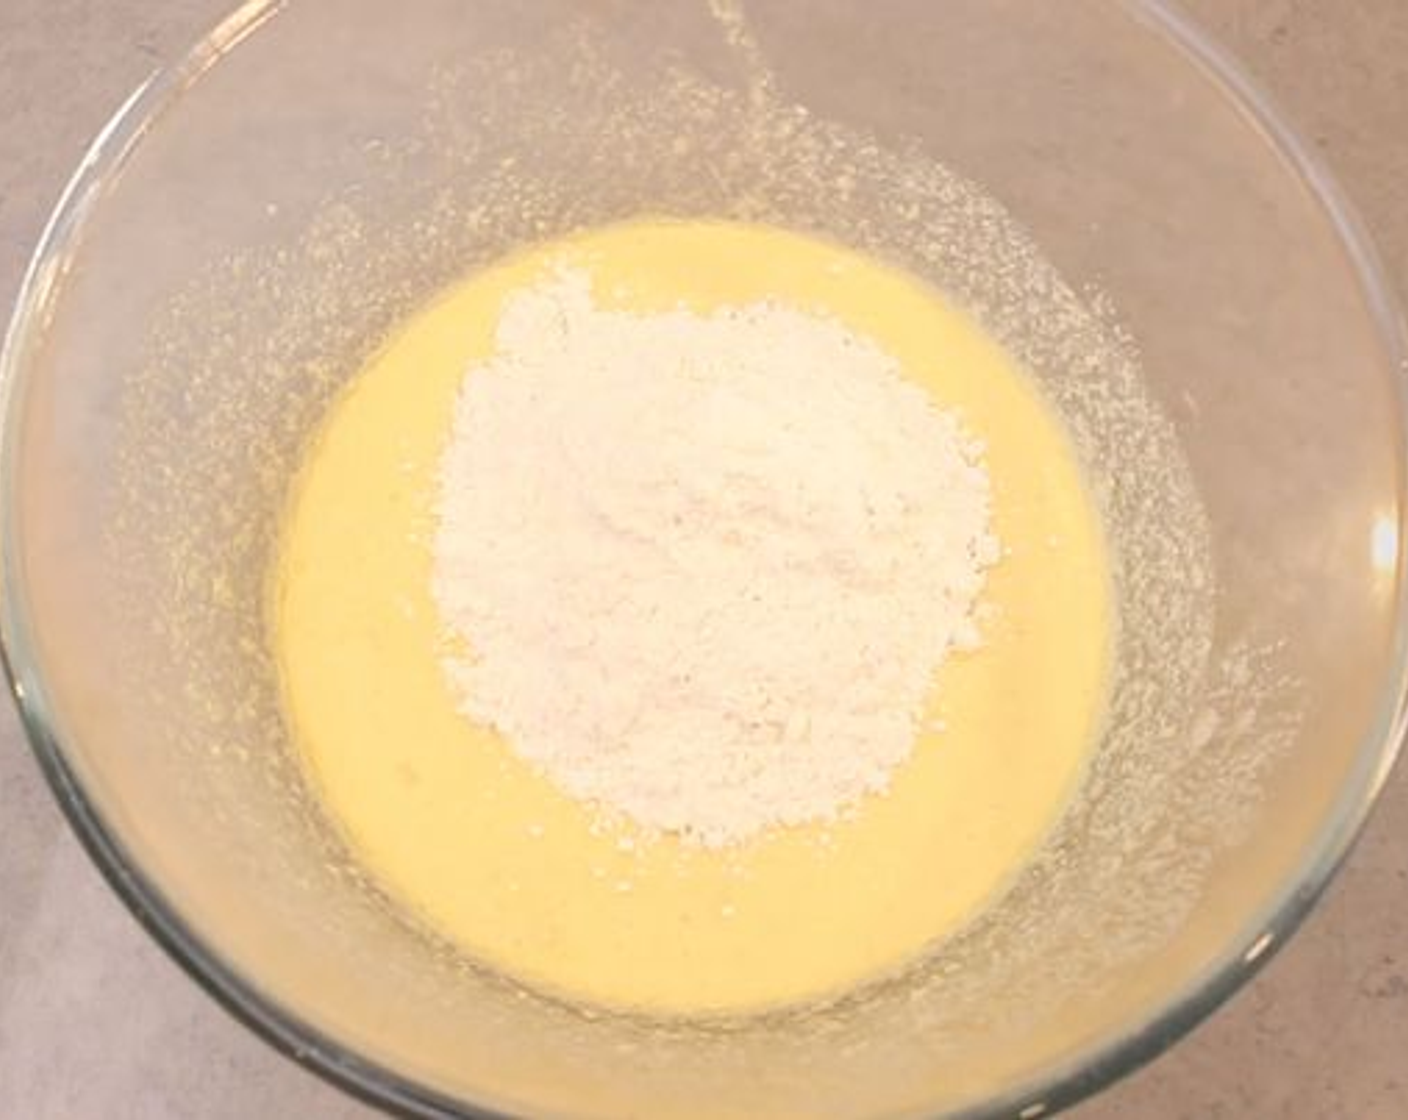 step 2 Into a large bowl add the Caster Sugar (1/2 cup) and Eggs (3) and then whisk until pale and creamy. Then add the Butter (1/4 cup) and whisk that in, now add the Vanilla Extract (1 tsp) and Self-Rising Flour (1/3 cup). Incorporate the flour well until you have a smooth cake batter consistency and then pour the batter into a greased pie dish.